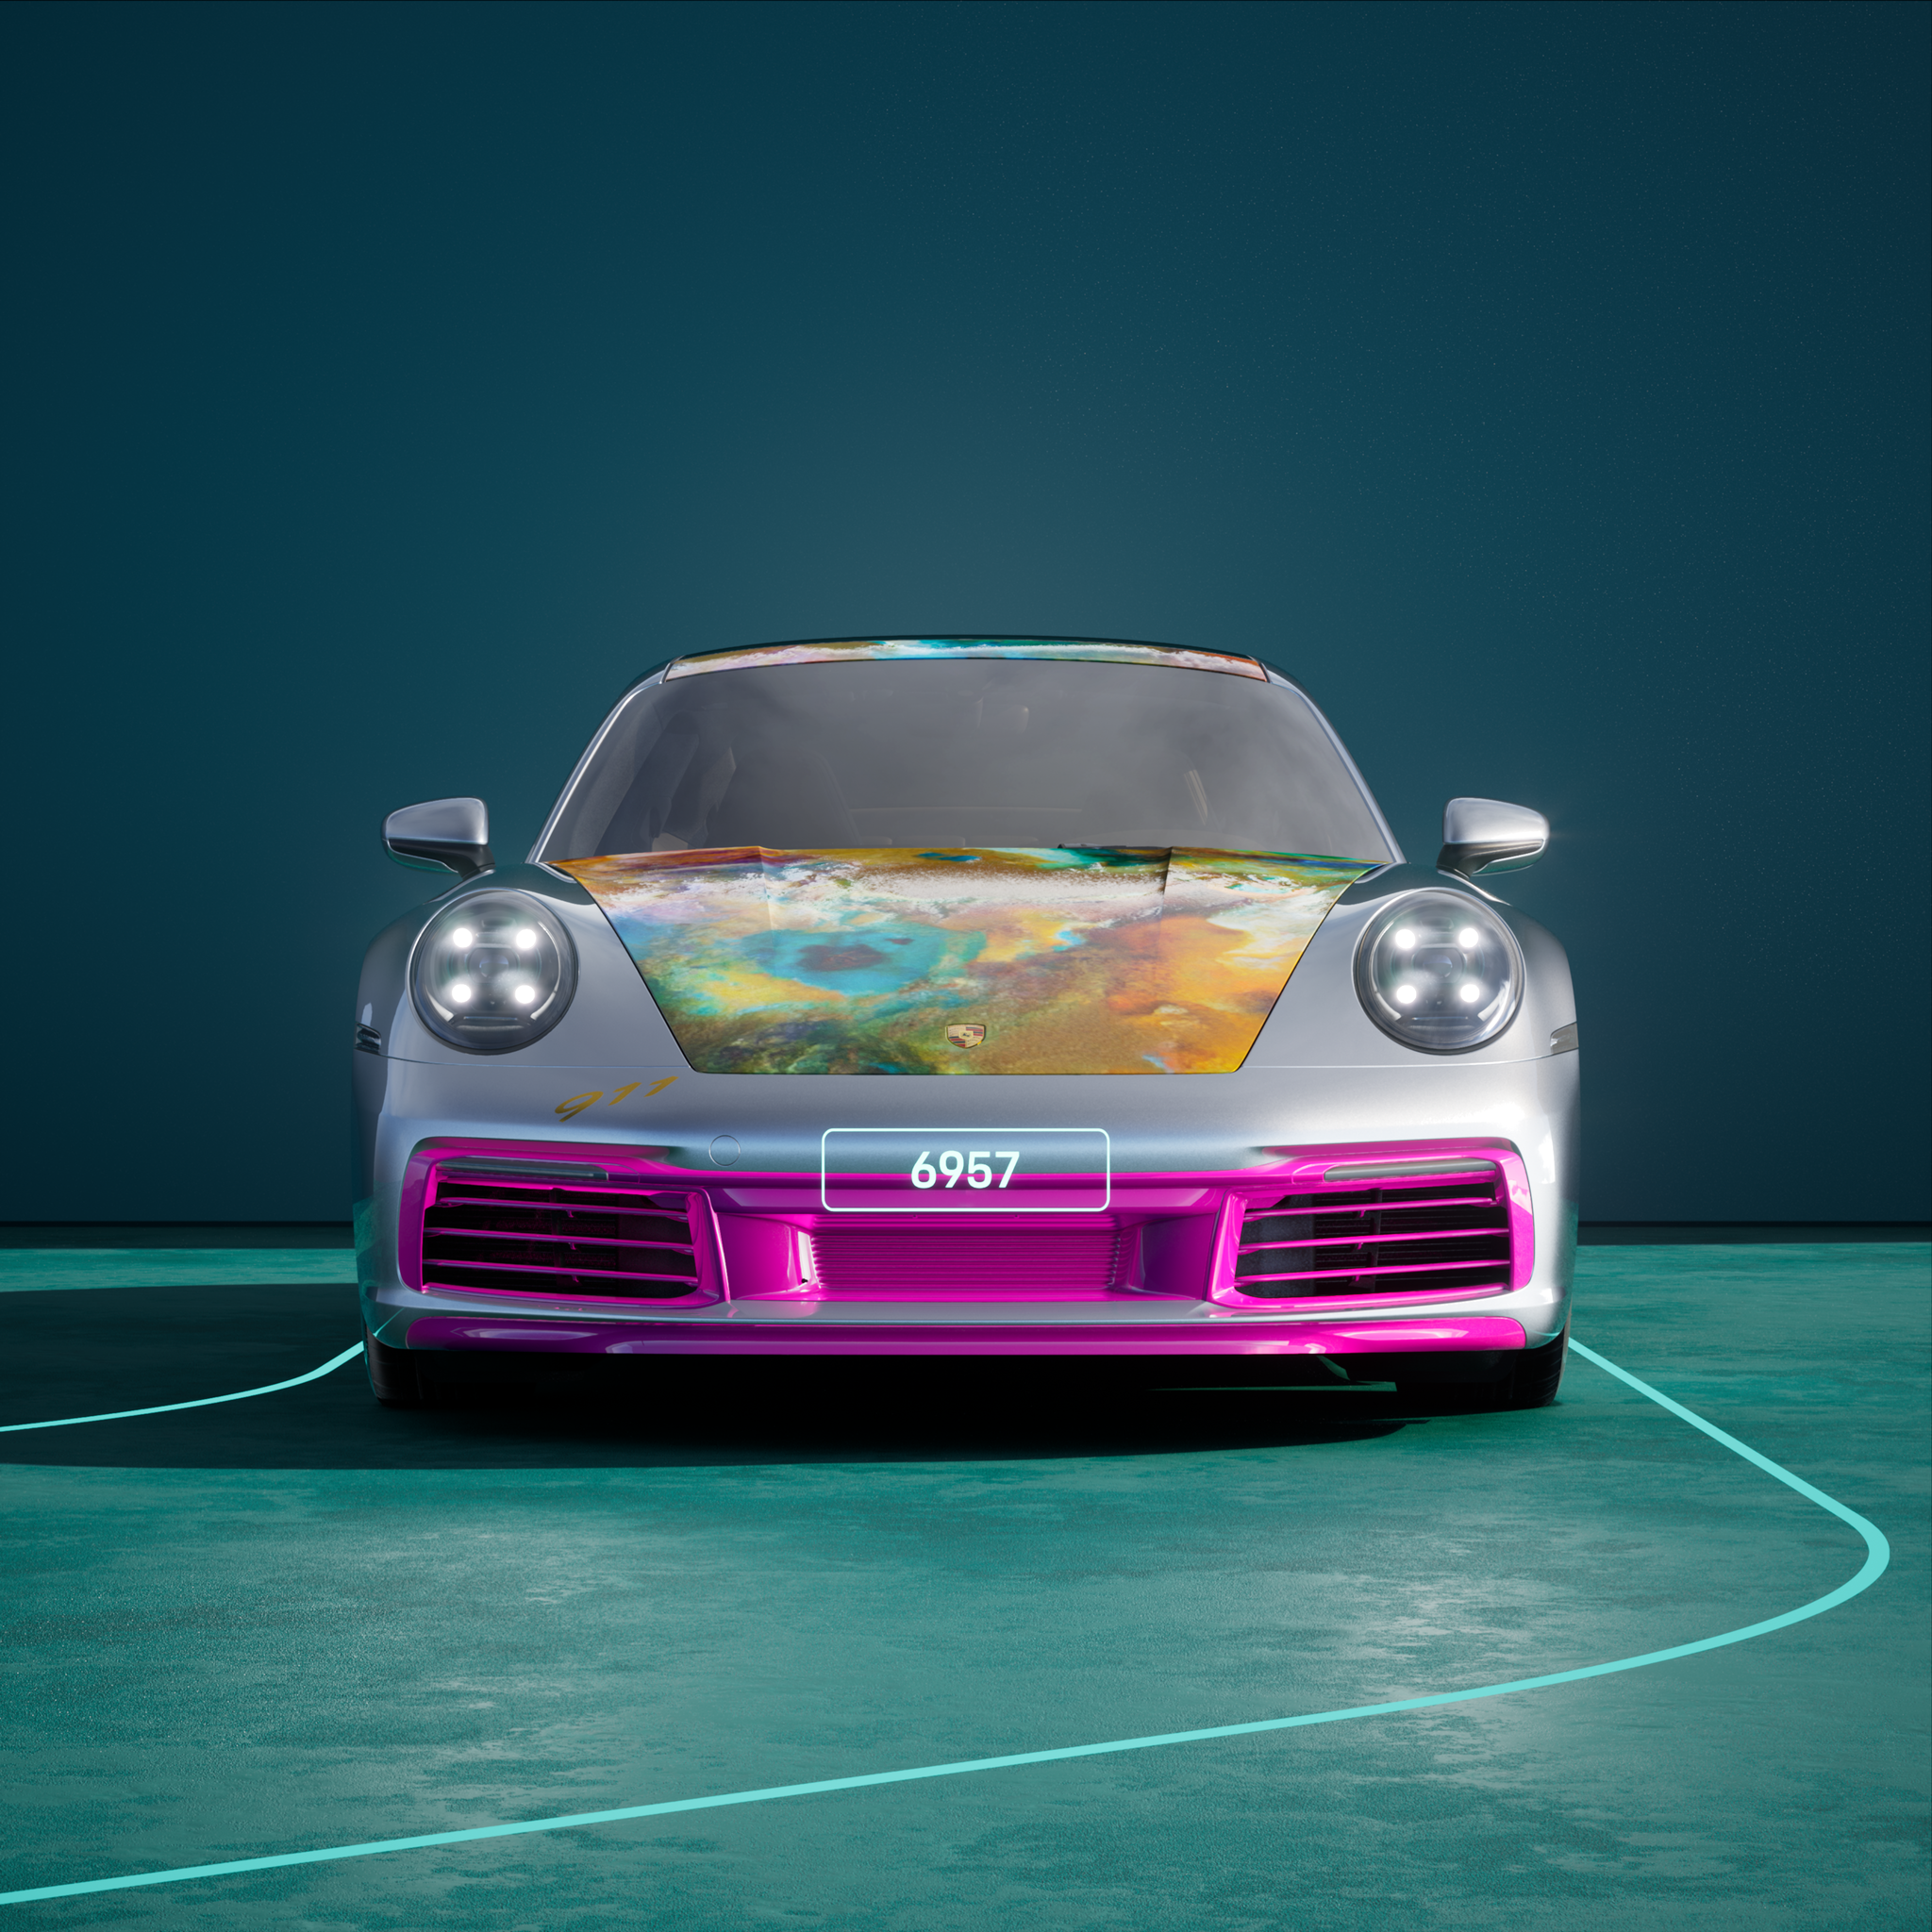 The PORSCHΞ 911 6957 image in phase